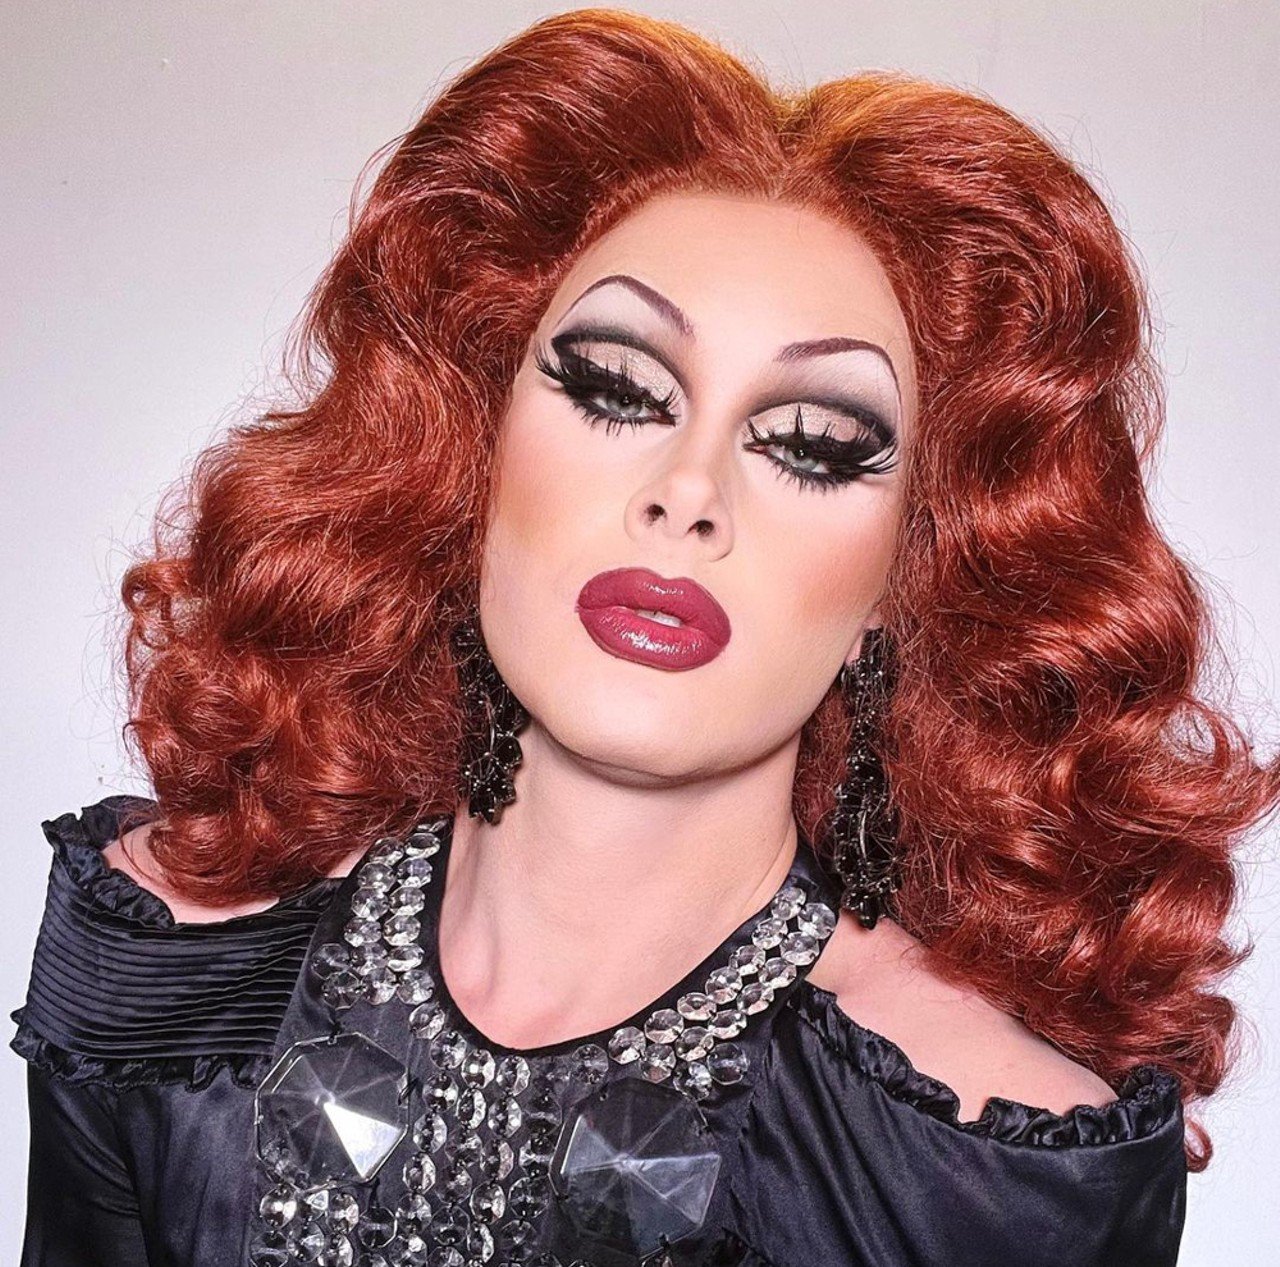  Scarlet Envy 
@scarletenvy  
You know her from the viral &#147;Is it me? Am I the drama?&#148; audio clip, but did you know she&#146;s also from Louisville? The former &#147;Drag Race&#148; contestant hosted a show/meet-and-greet at Purrfect Day Cat Cafe in 2022 called &#147;Purr, SLAY, Sip.&#148;
Photo via scarletenvy/Instagram